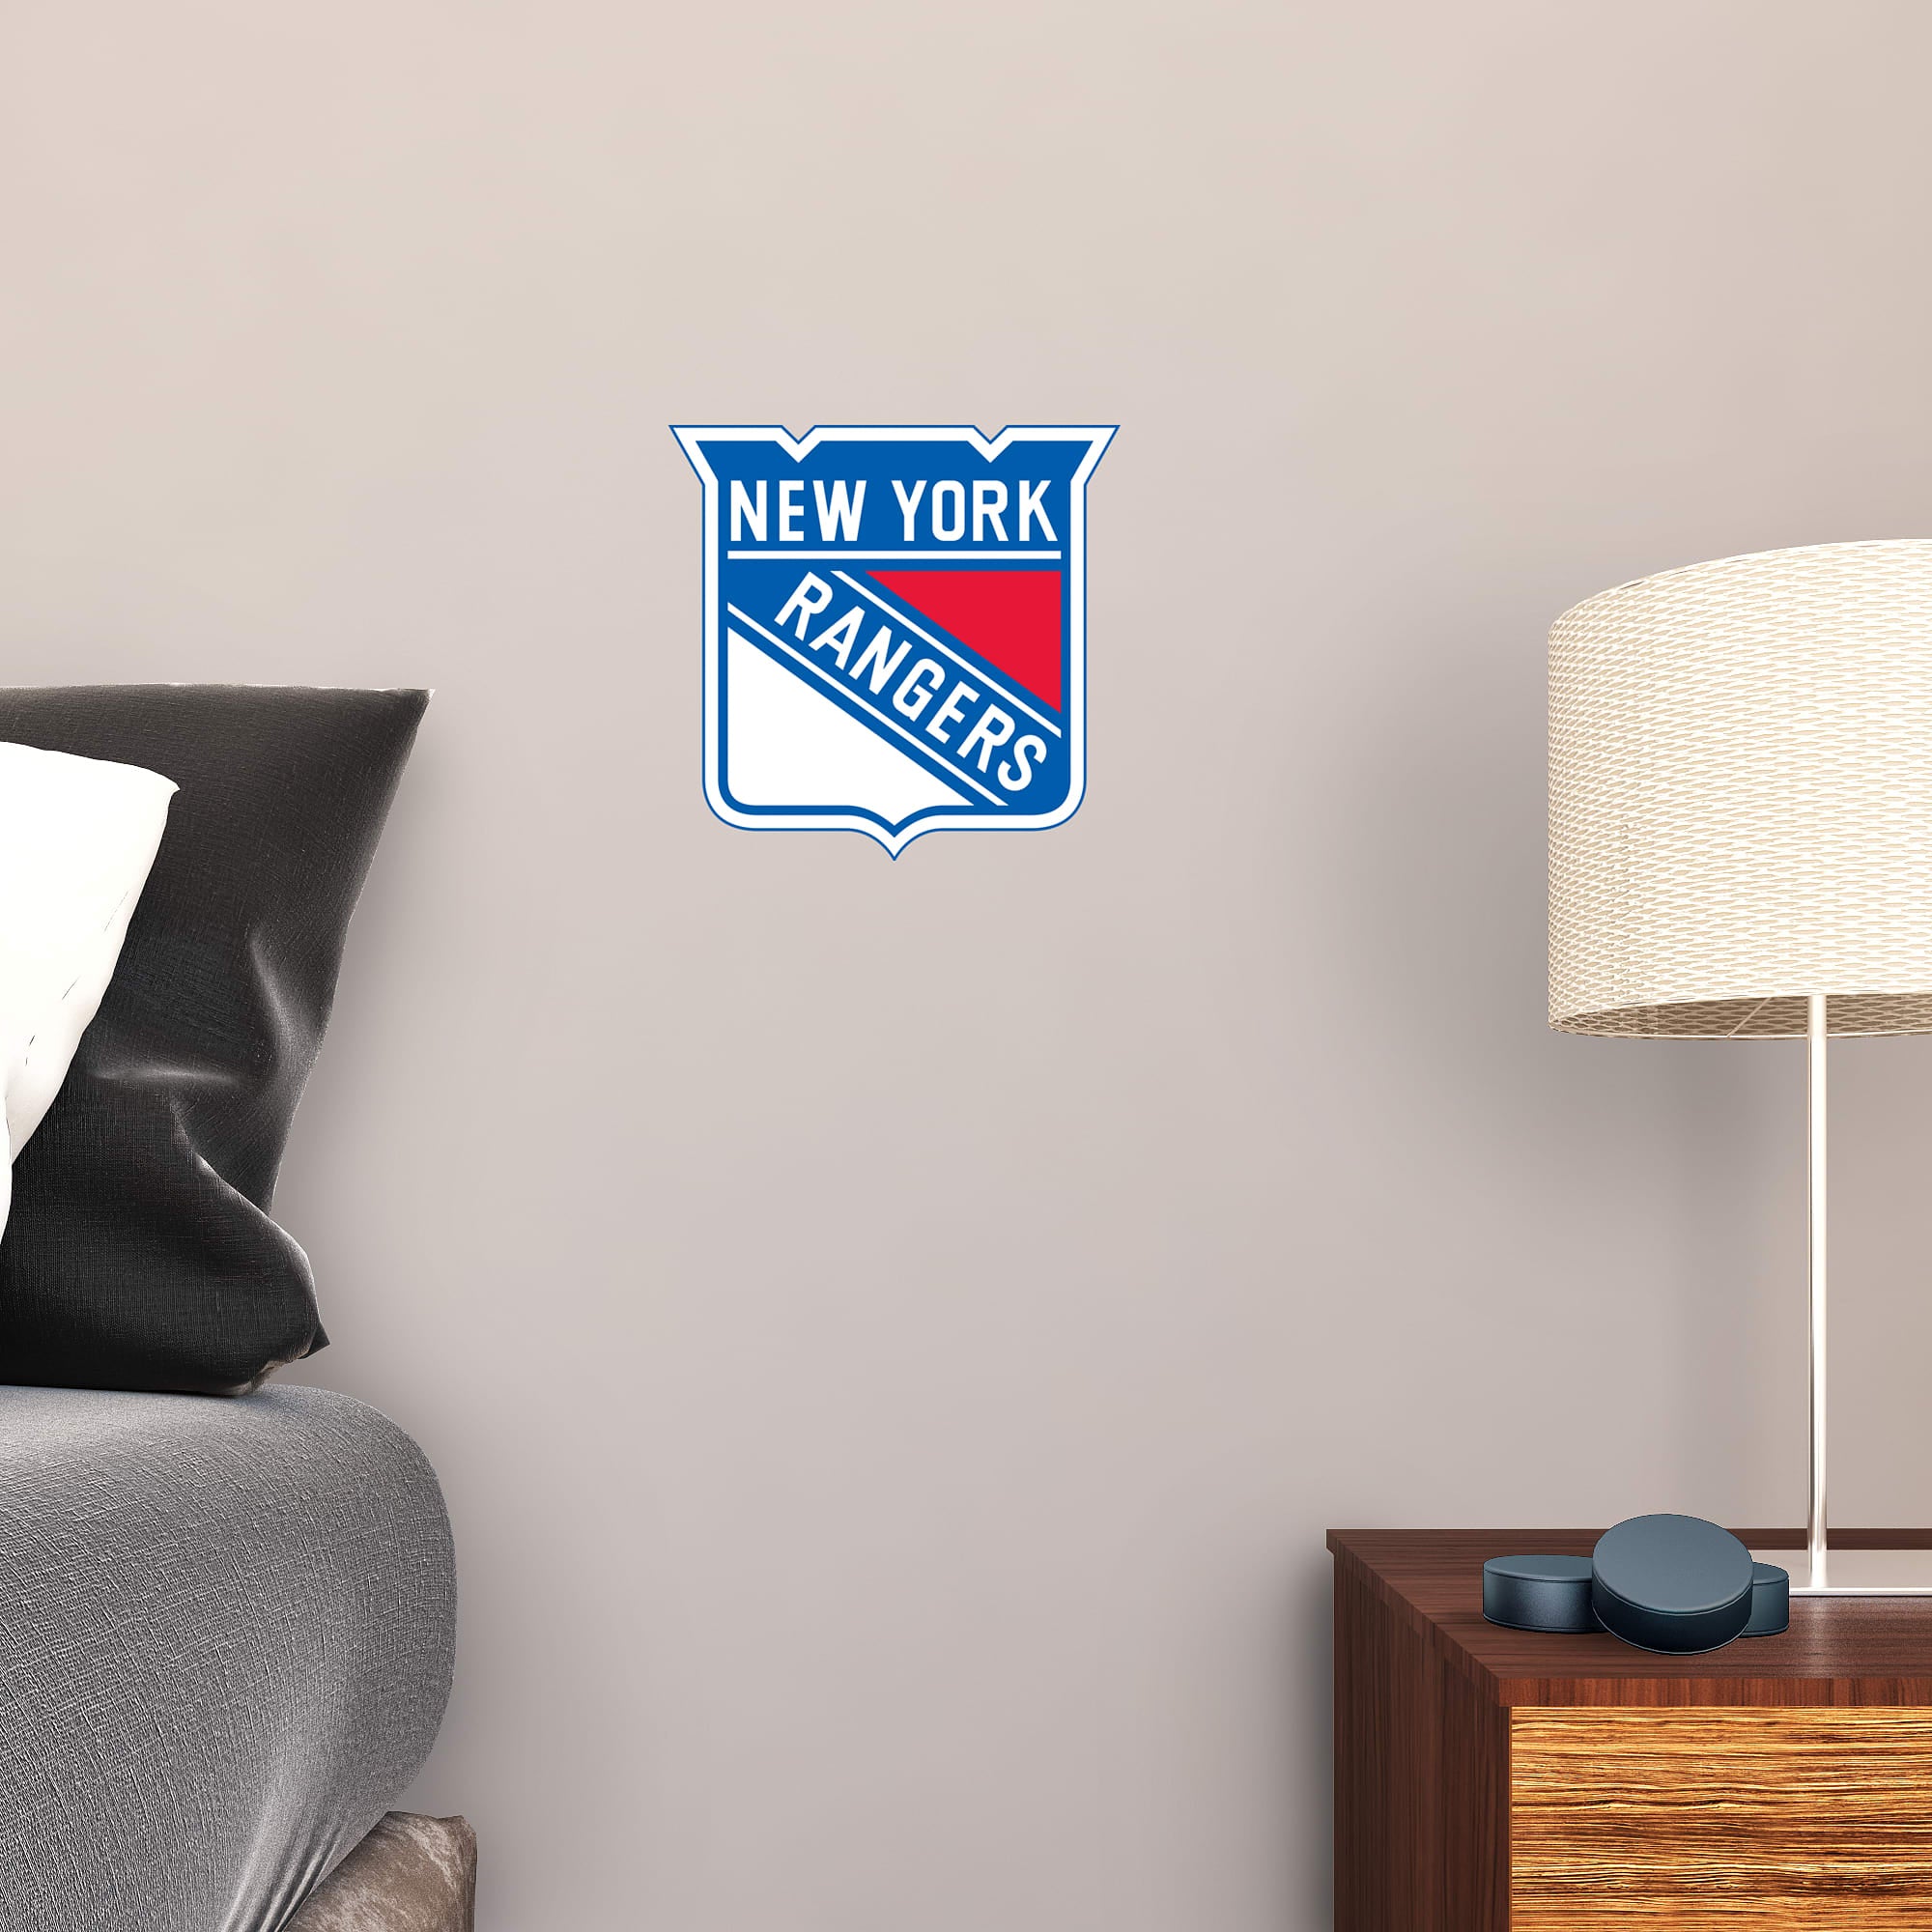 New York Rangers: Logo - Officially Licensed NHL Removable Wall Decal Large by Fathead | Vinyl